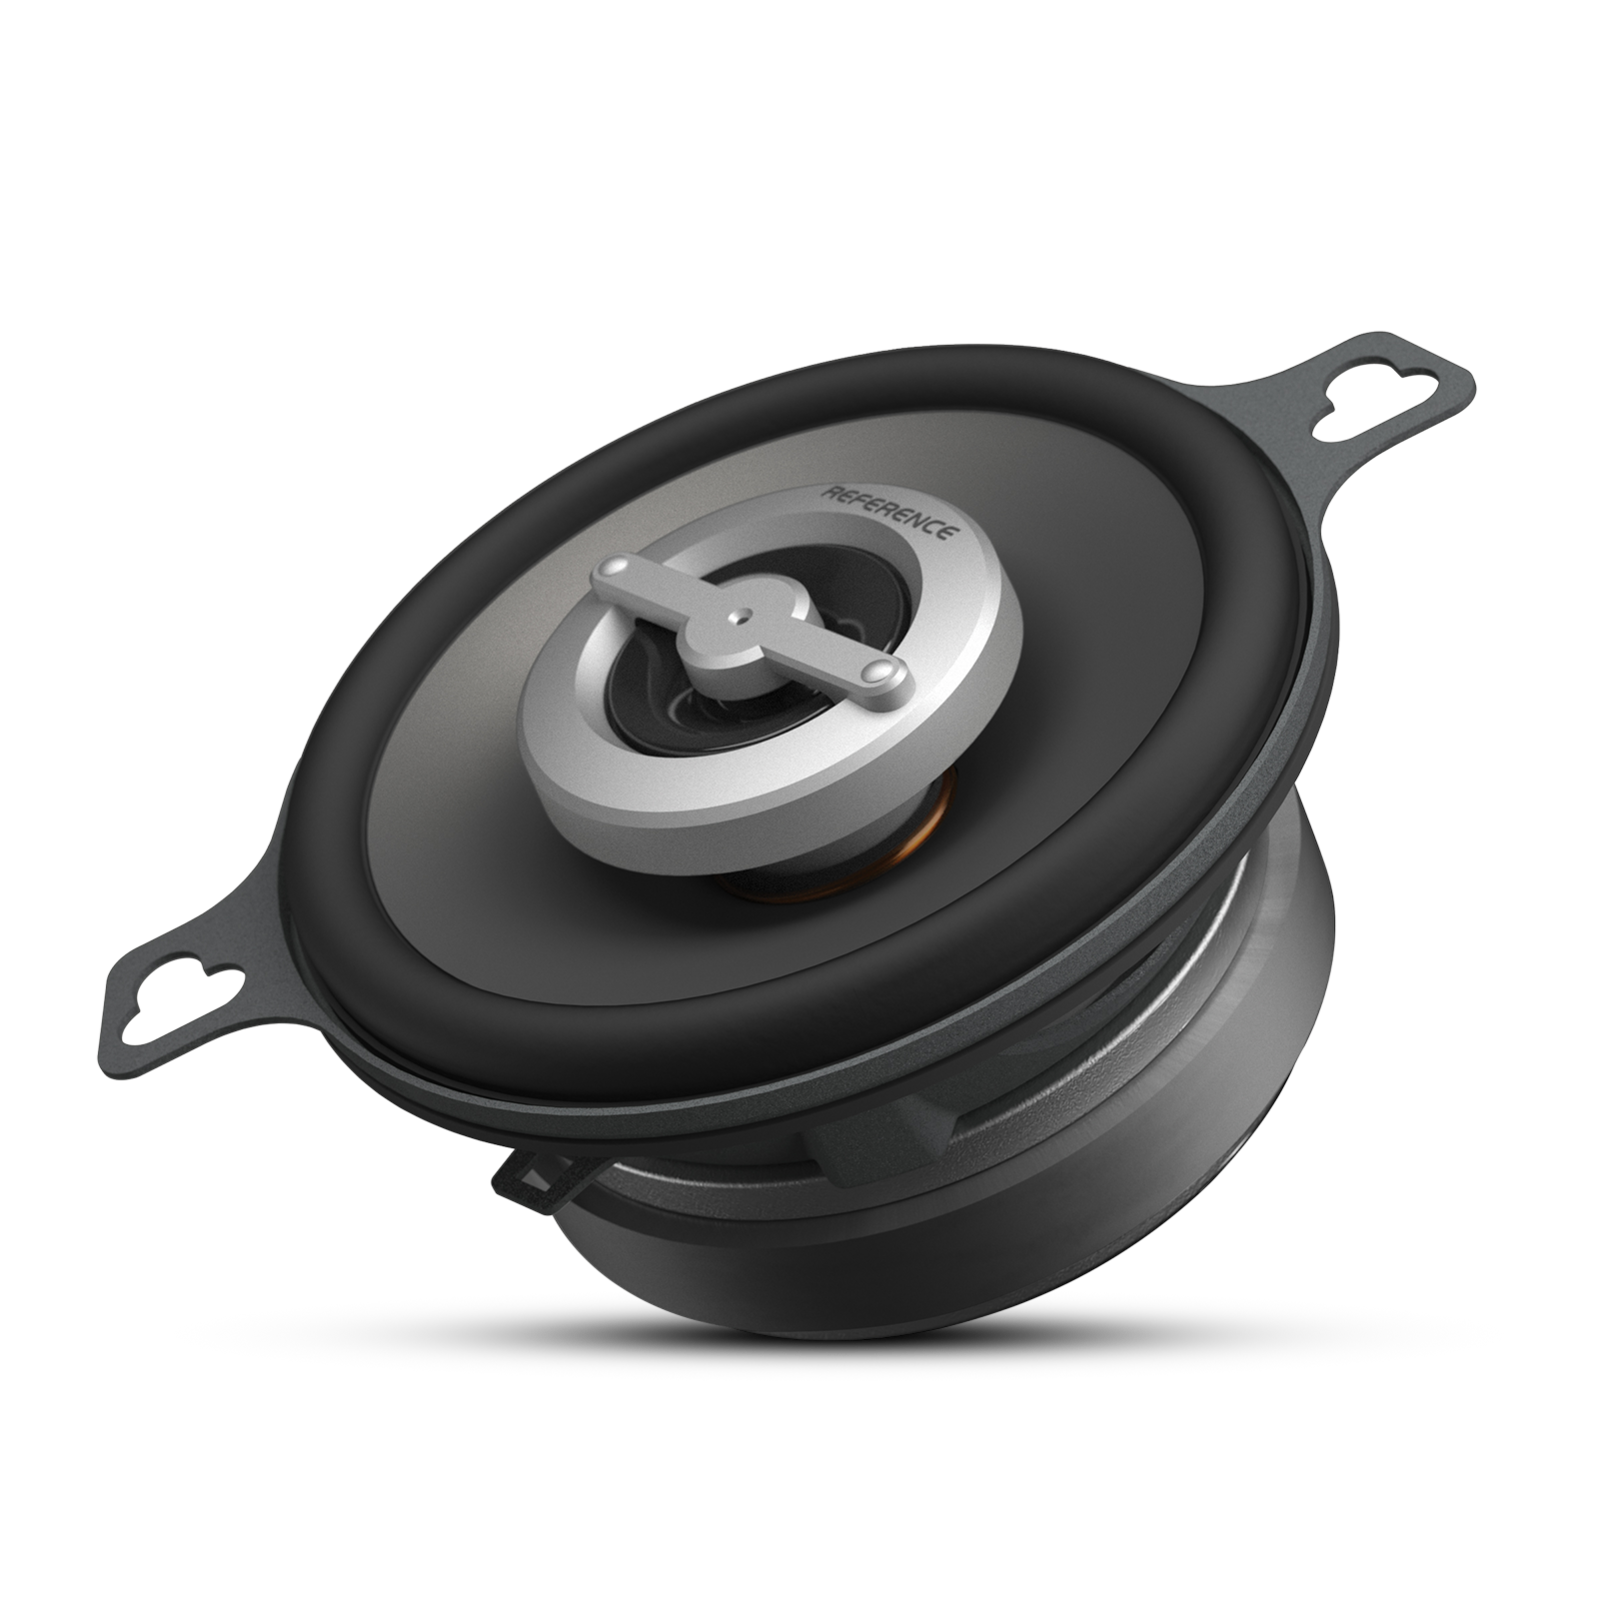 Reference 3002cfx - Black - A 3-1/2" (87mm), custom-fit, two-way high-fidelity coaxial speaker with true 4-ohm technology - Hero